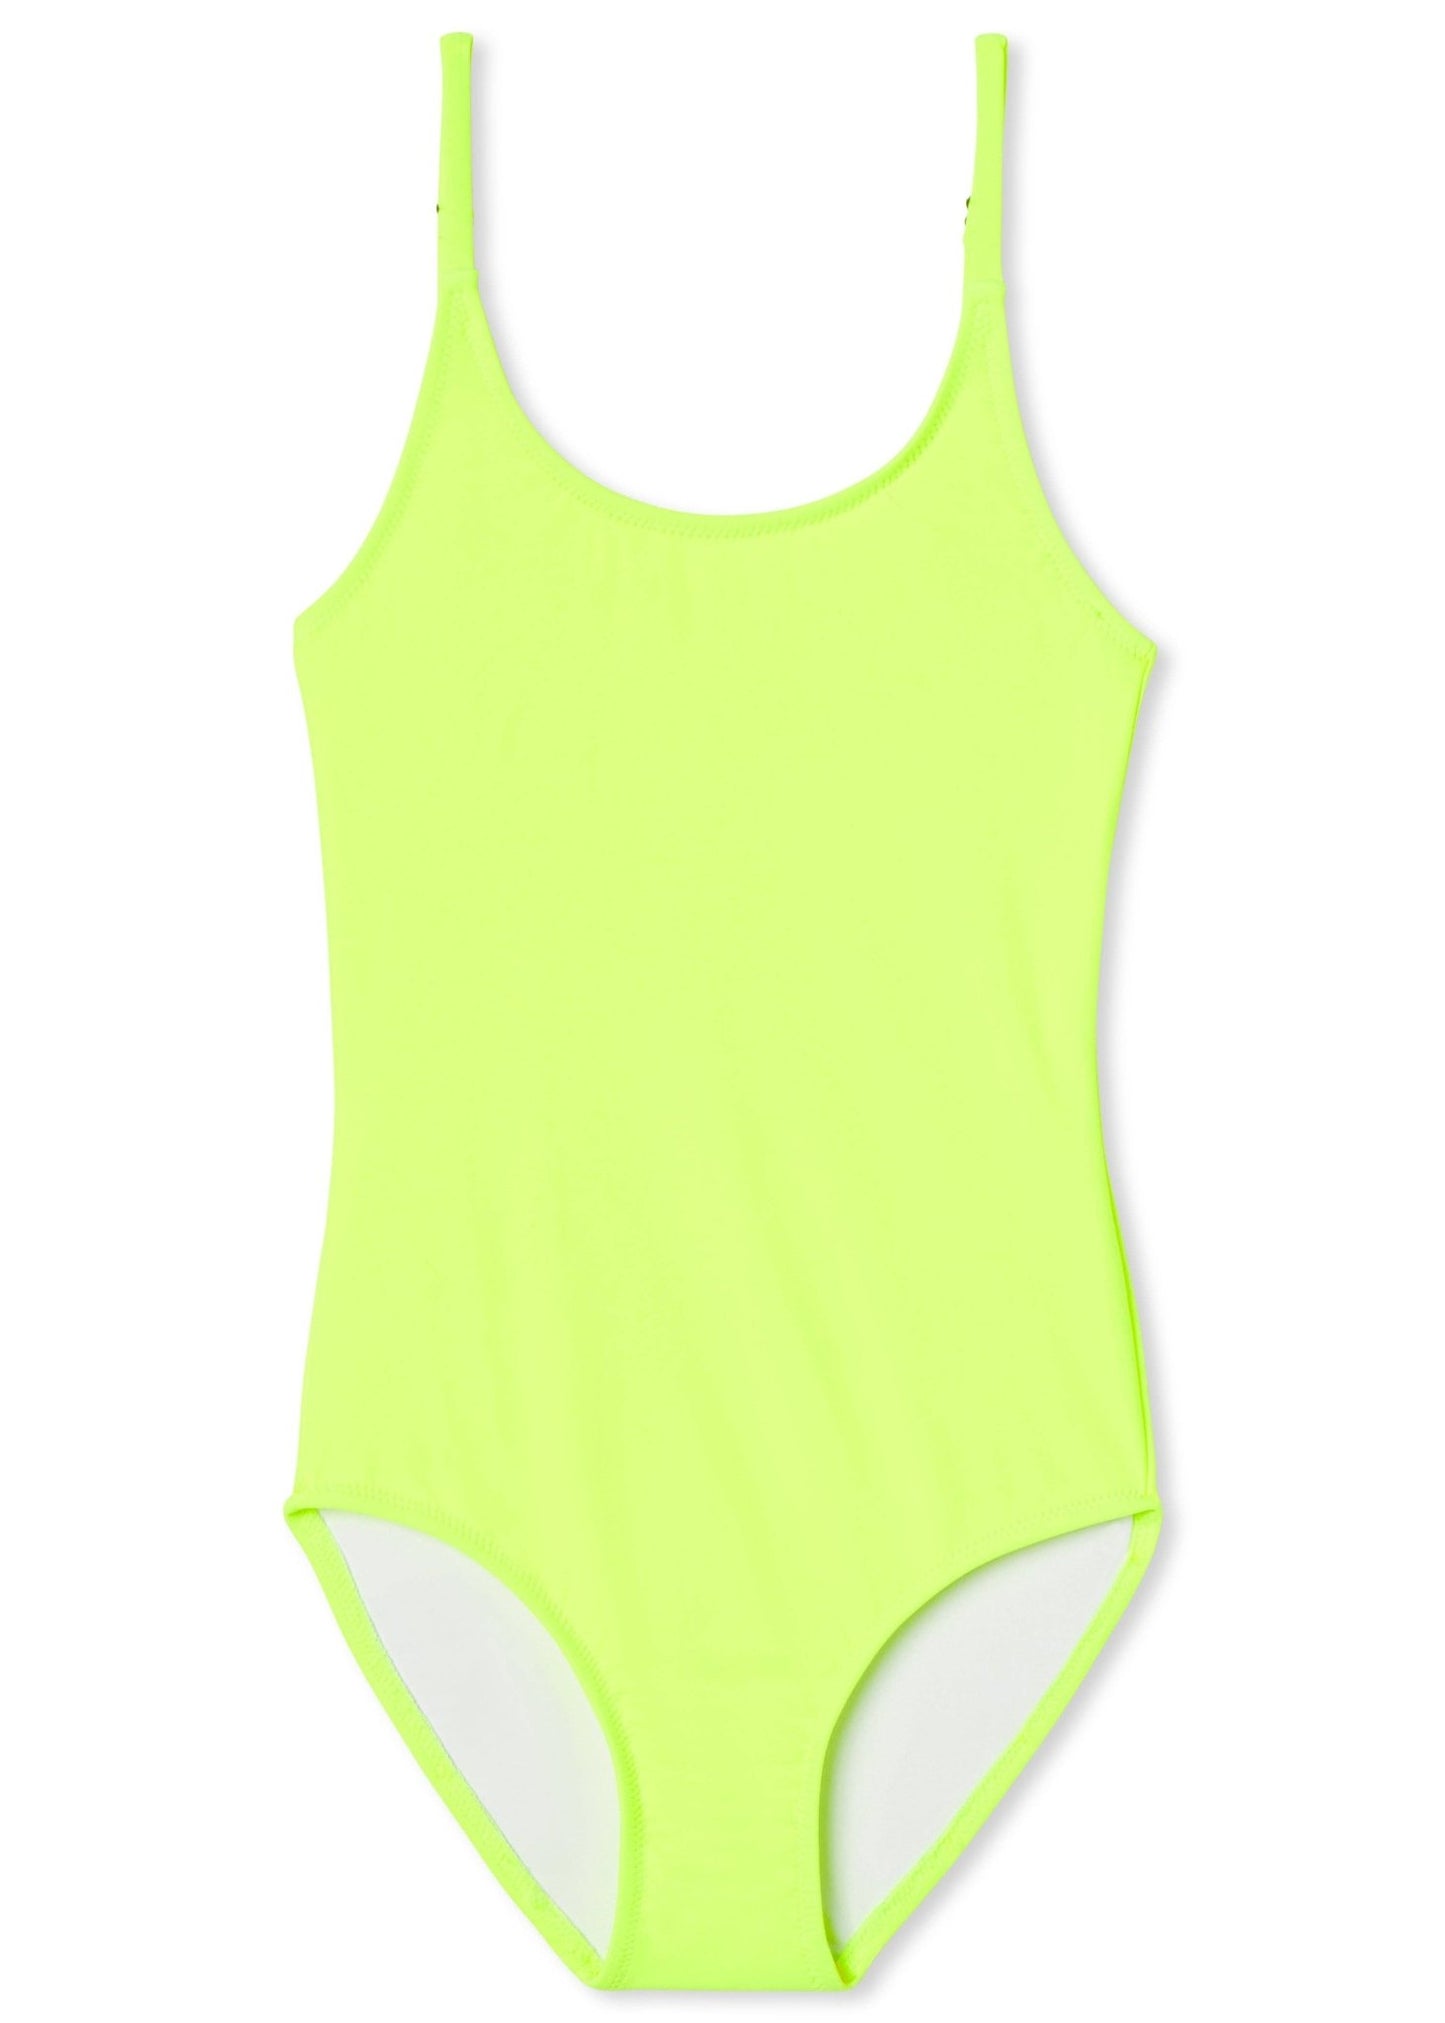 Neon Yellow Bathing Suit for Girls - Something about Sofia